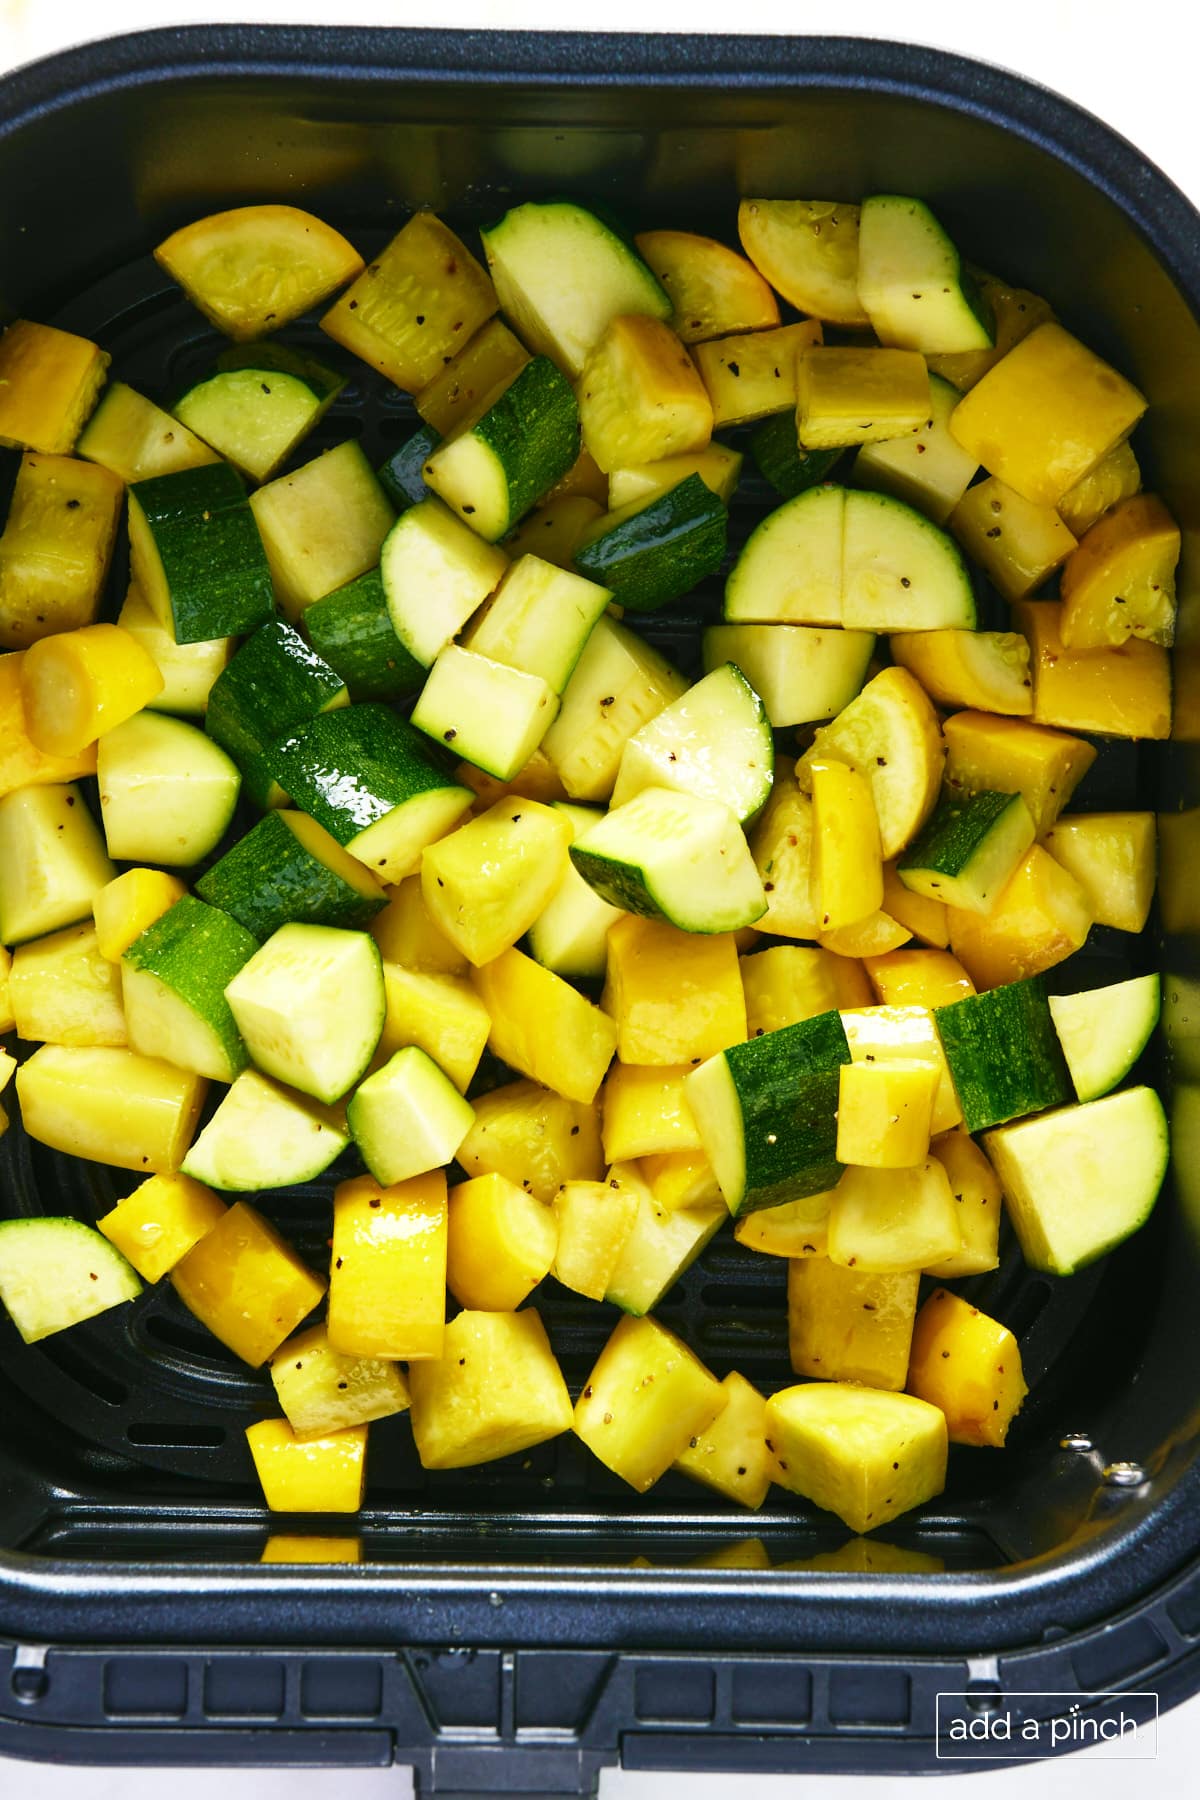 Cut yellow squash and zucchini in an air fryer basket ready to be cooked.